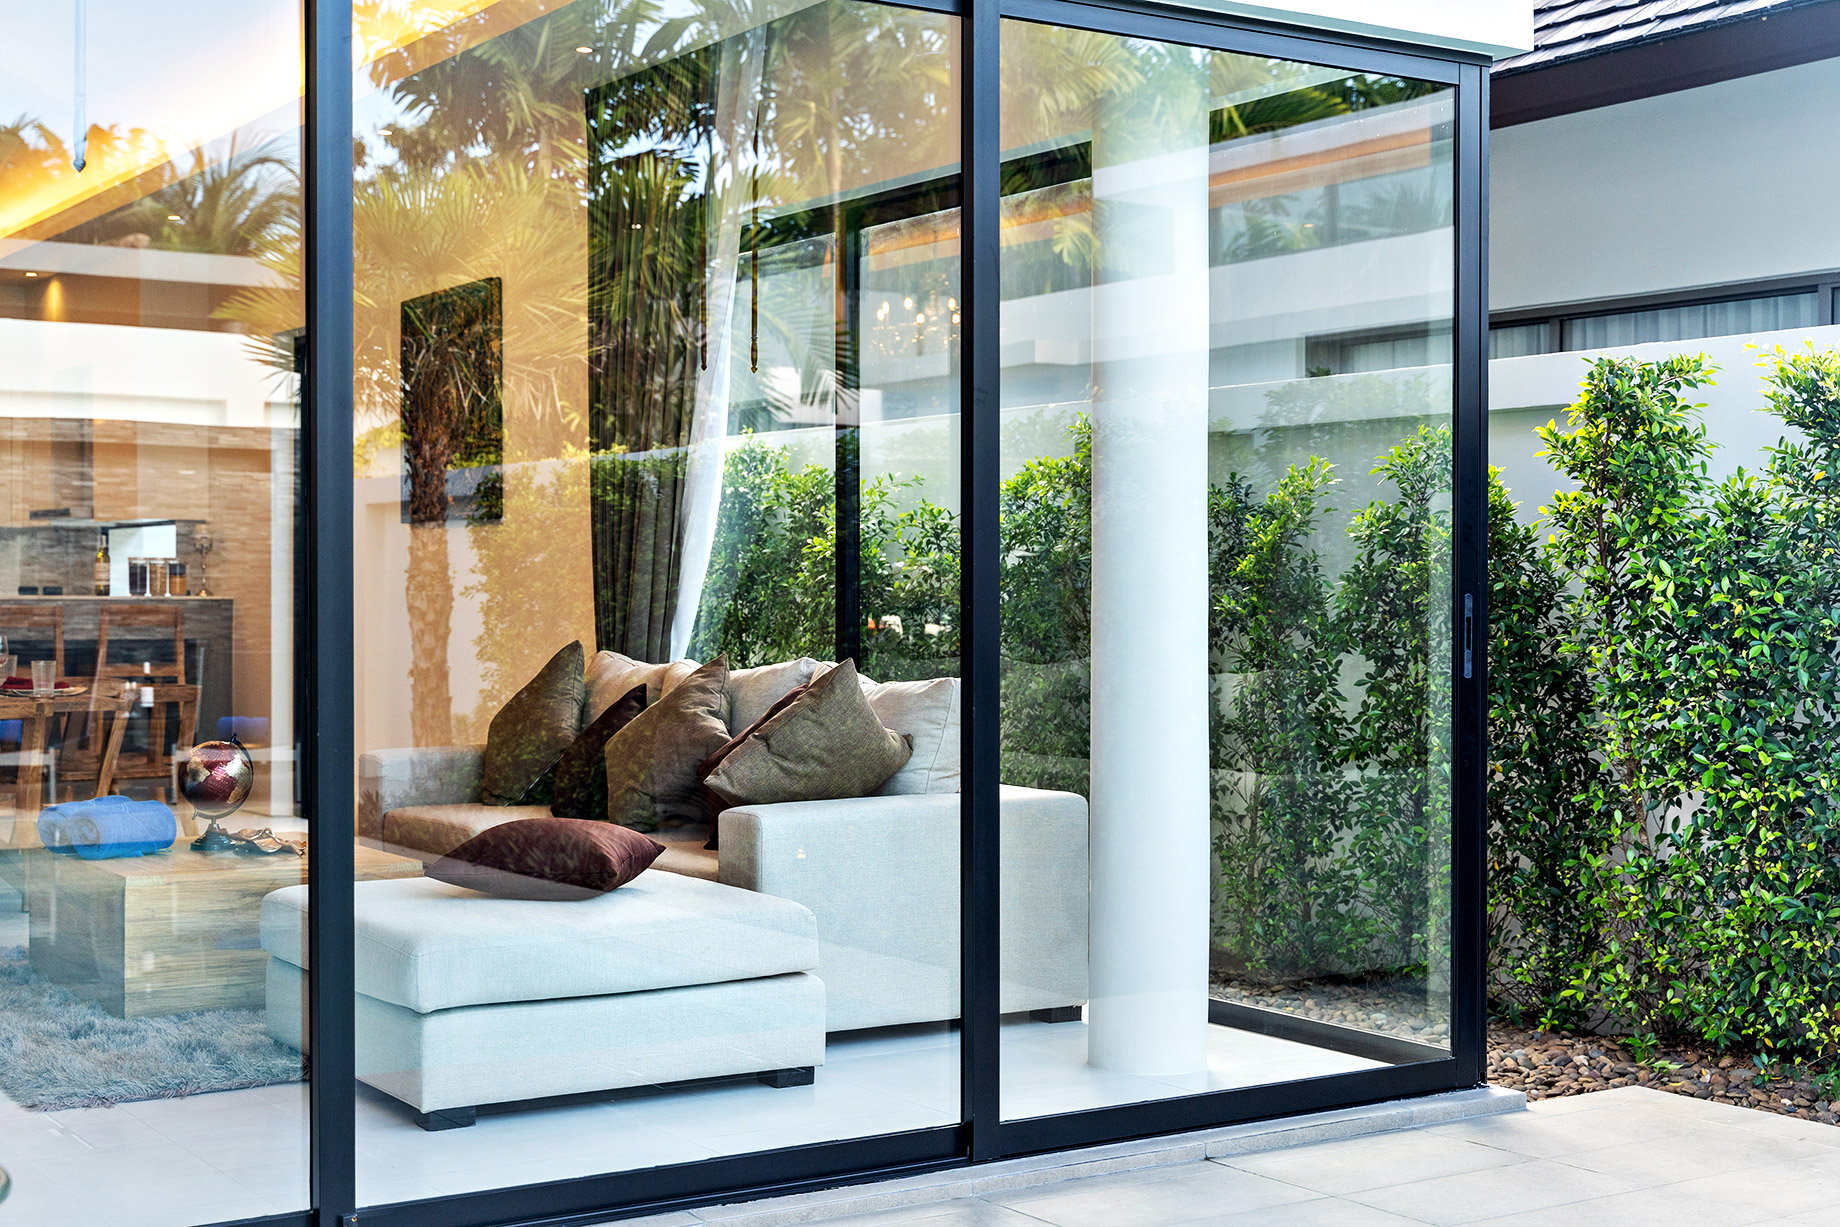 What to Consider When Choosing a Sliding Glass Door – The Pinnacle List